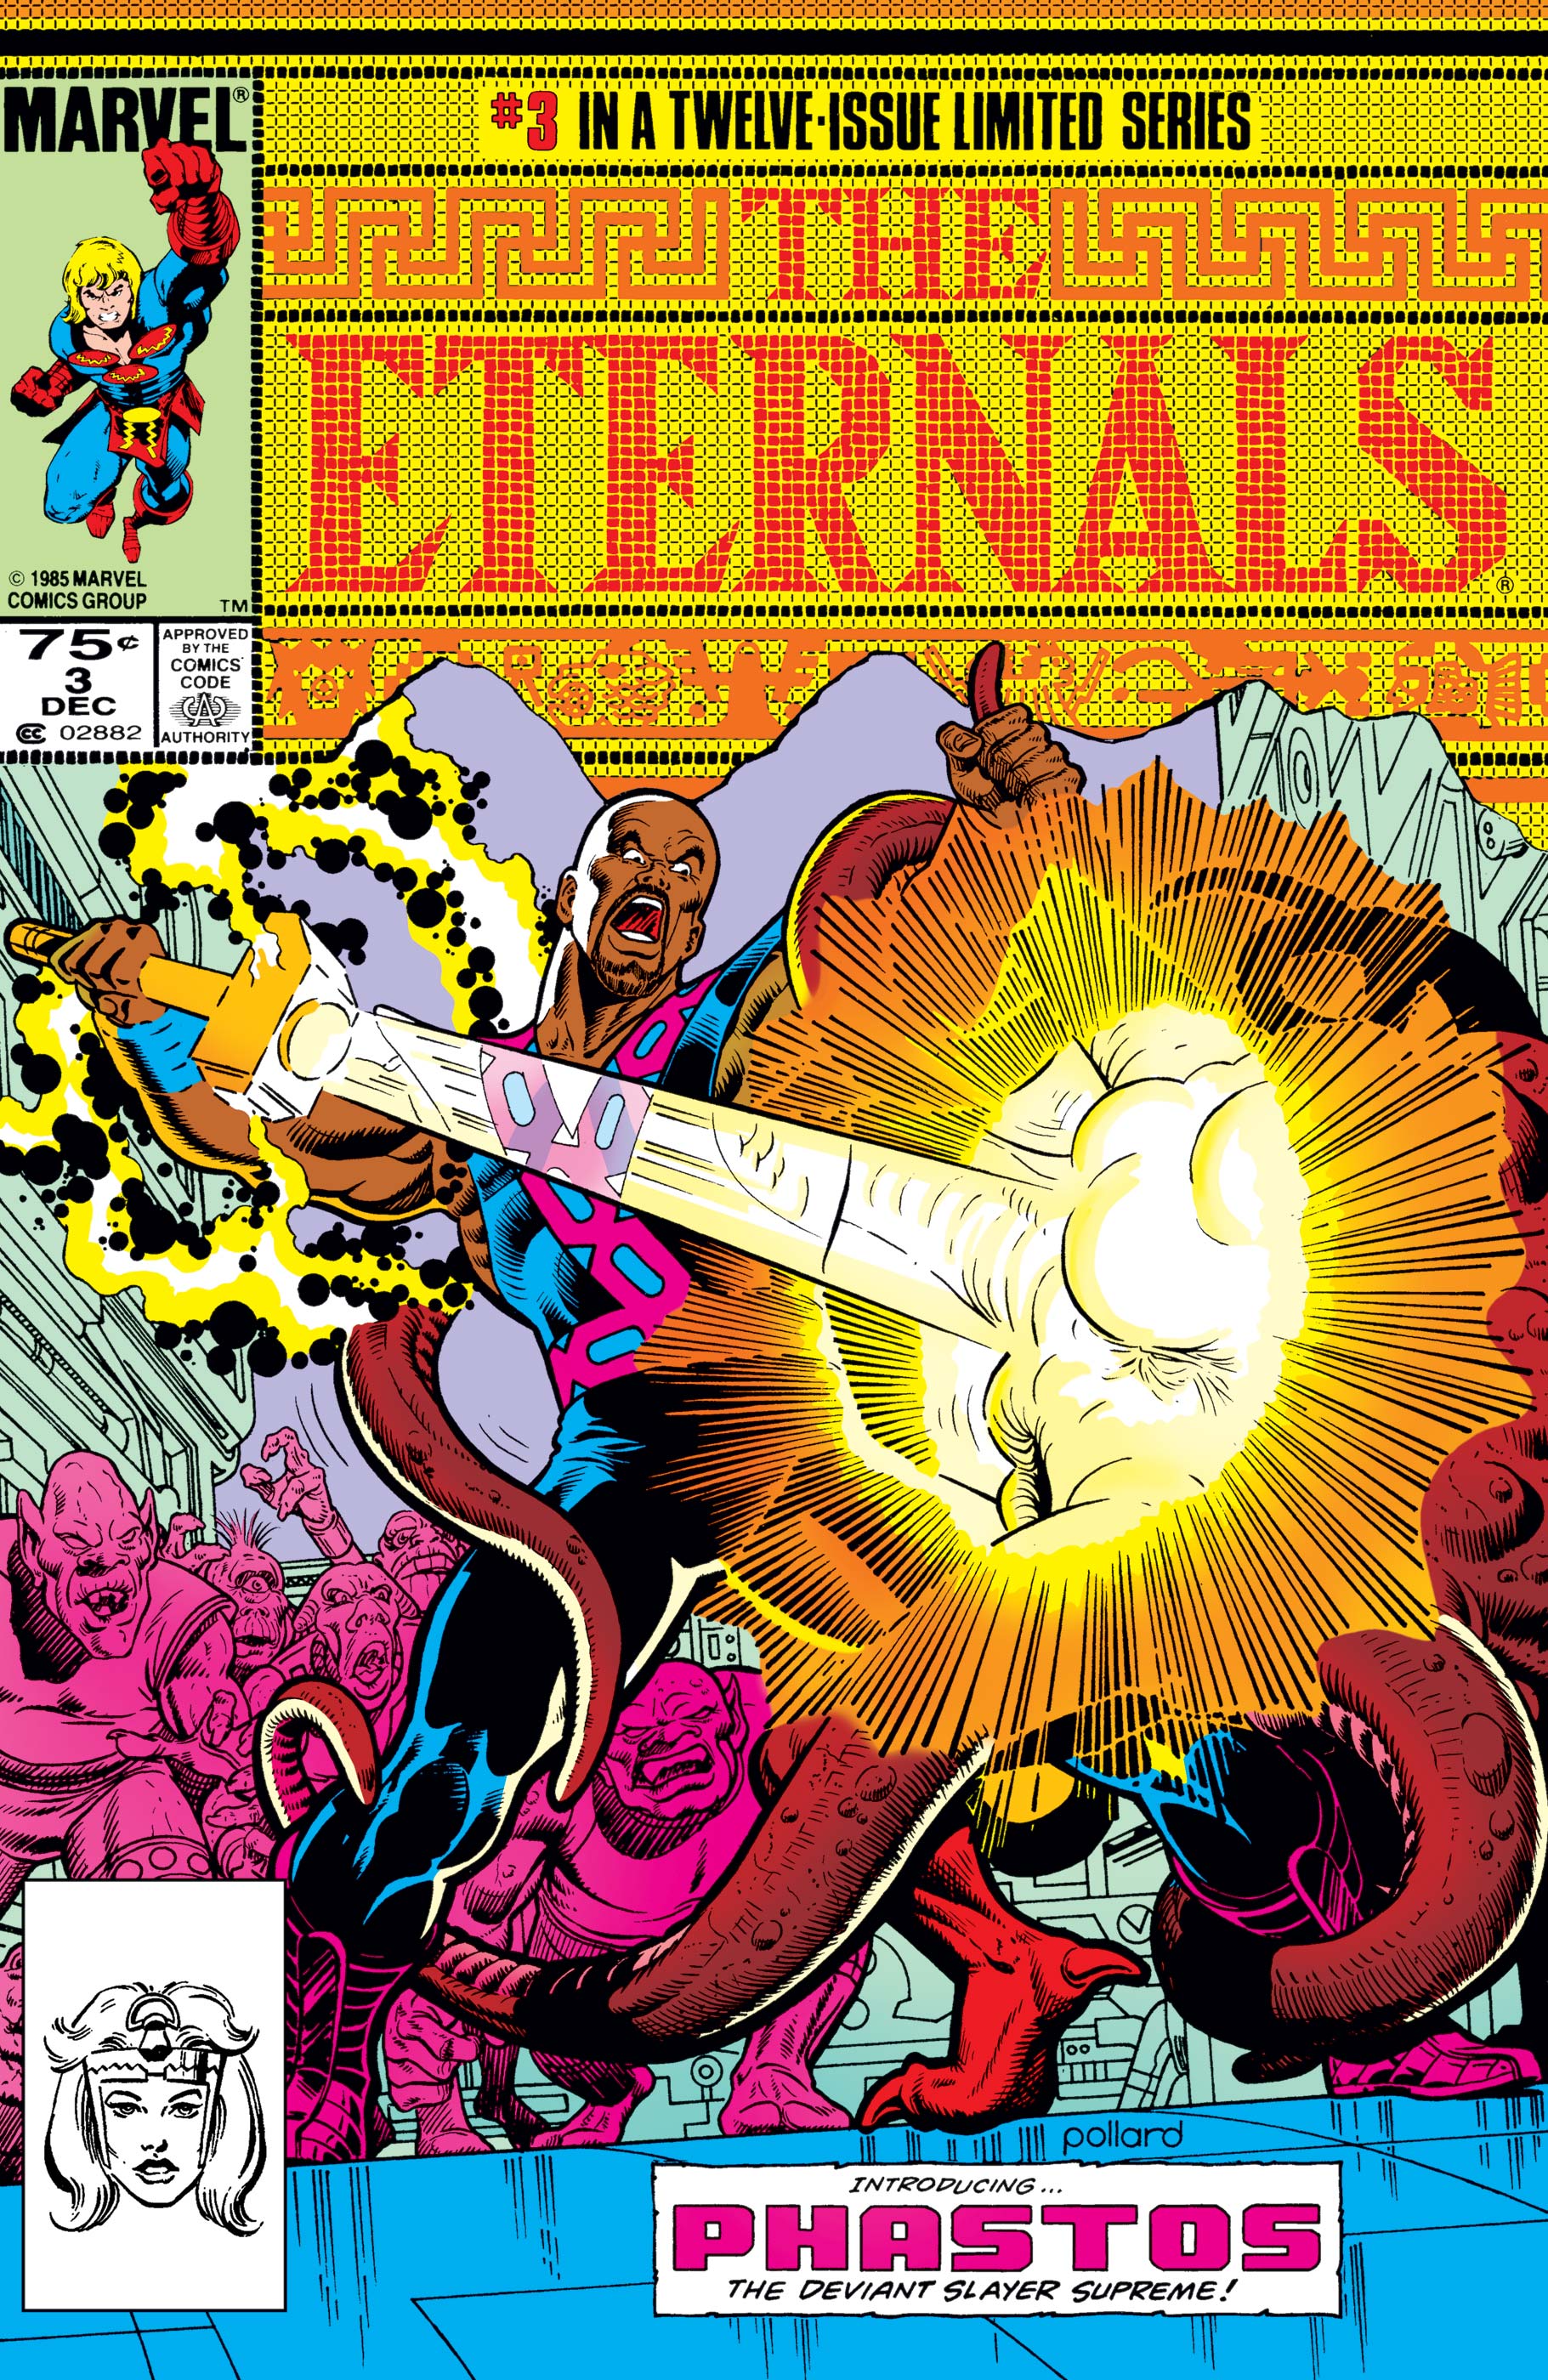 The Eternals (1985) 3 Comic Issues Marvel